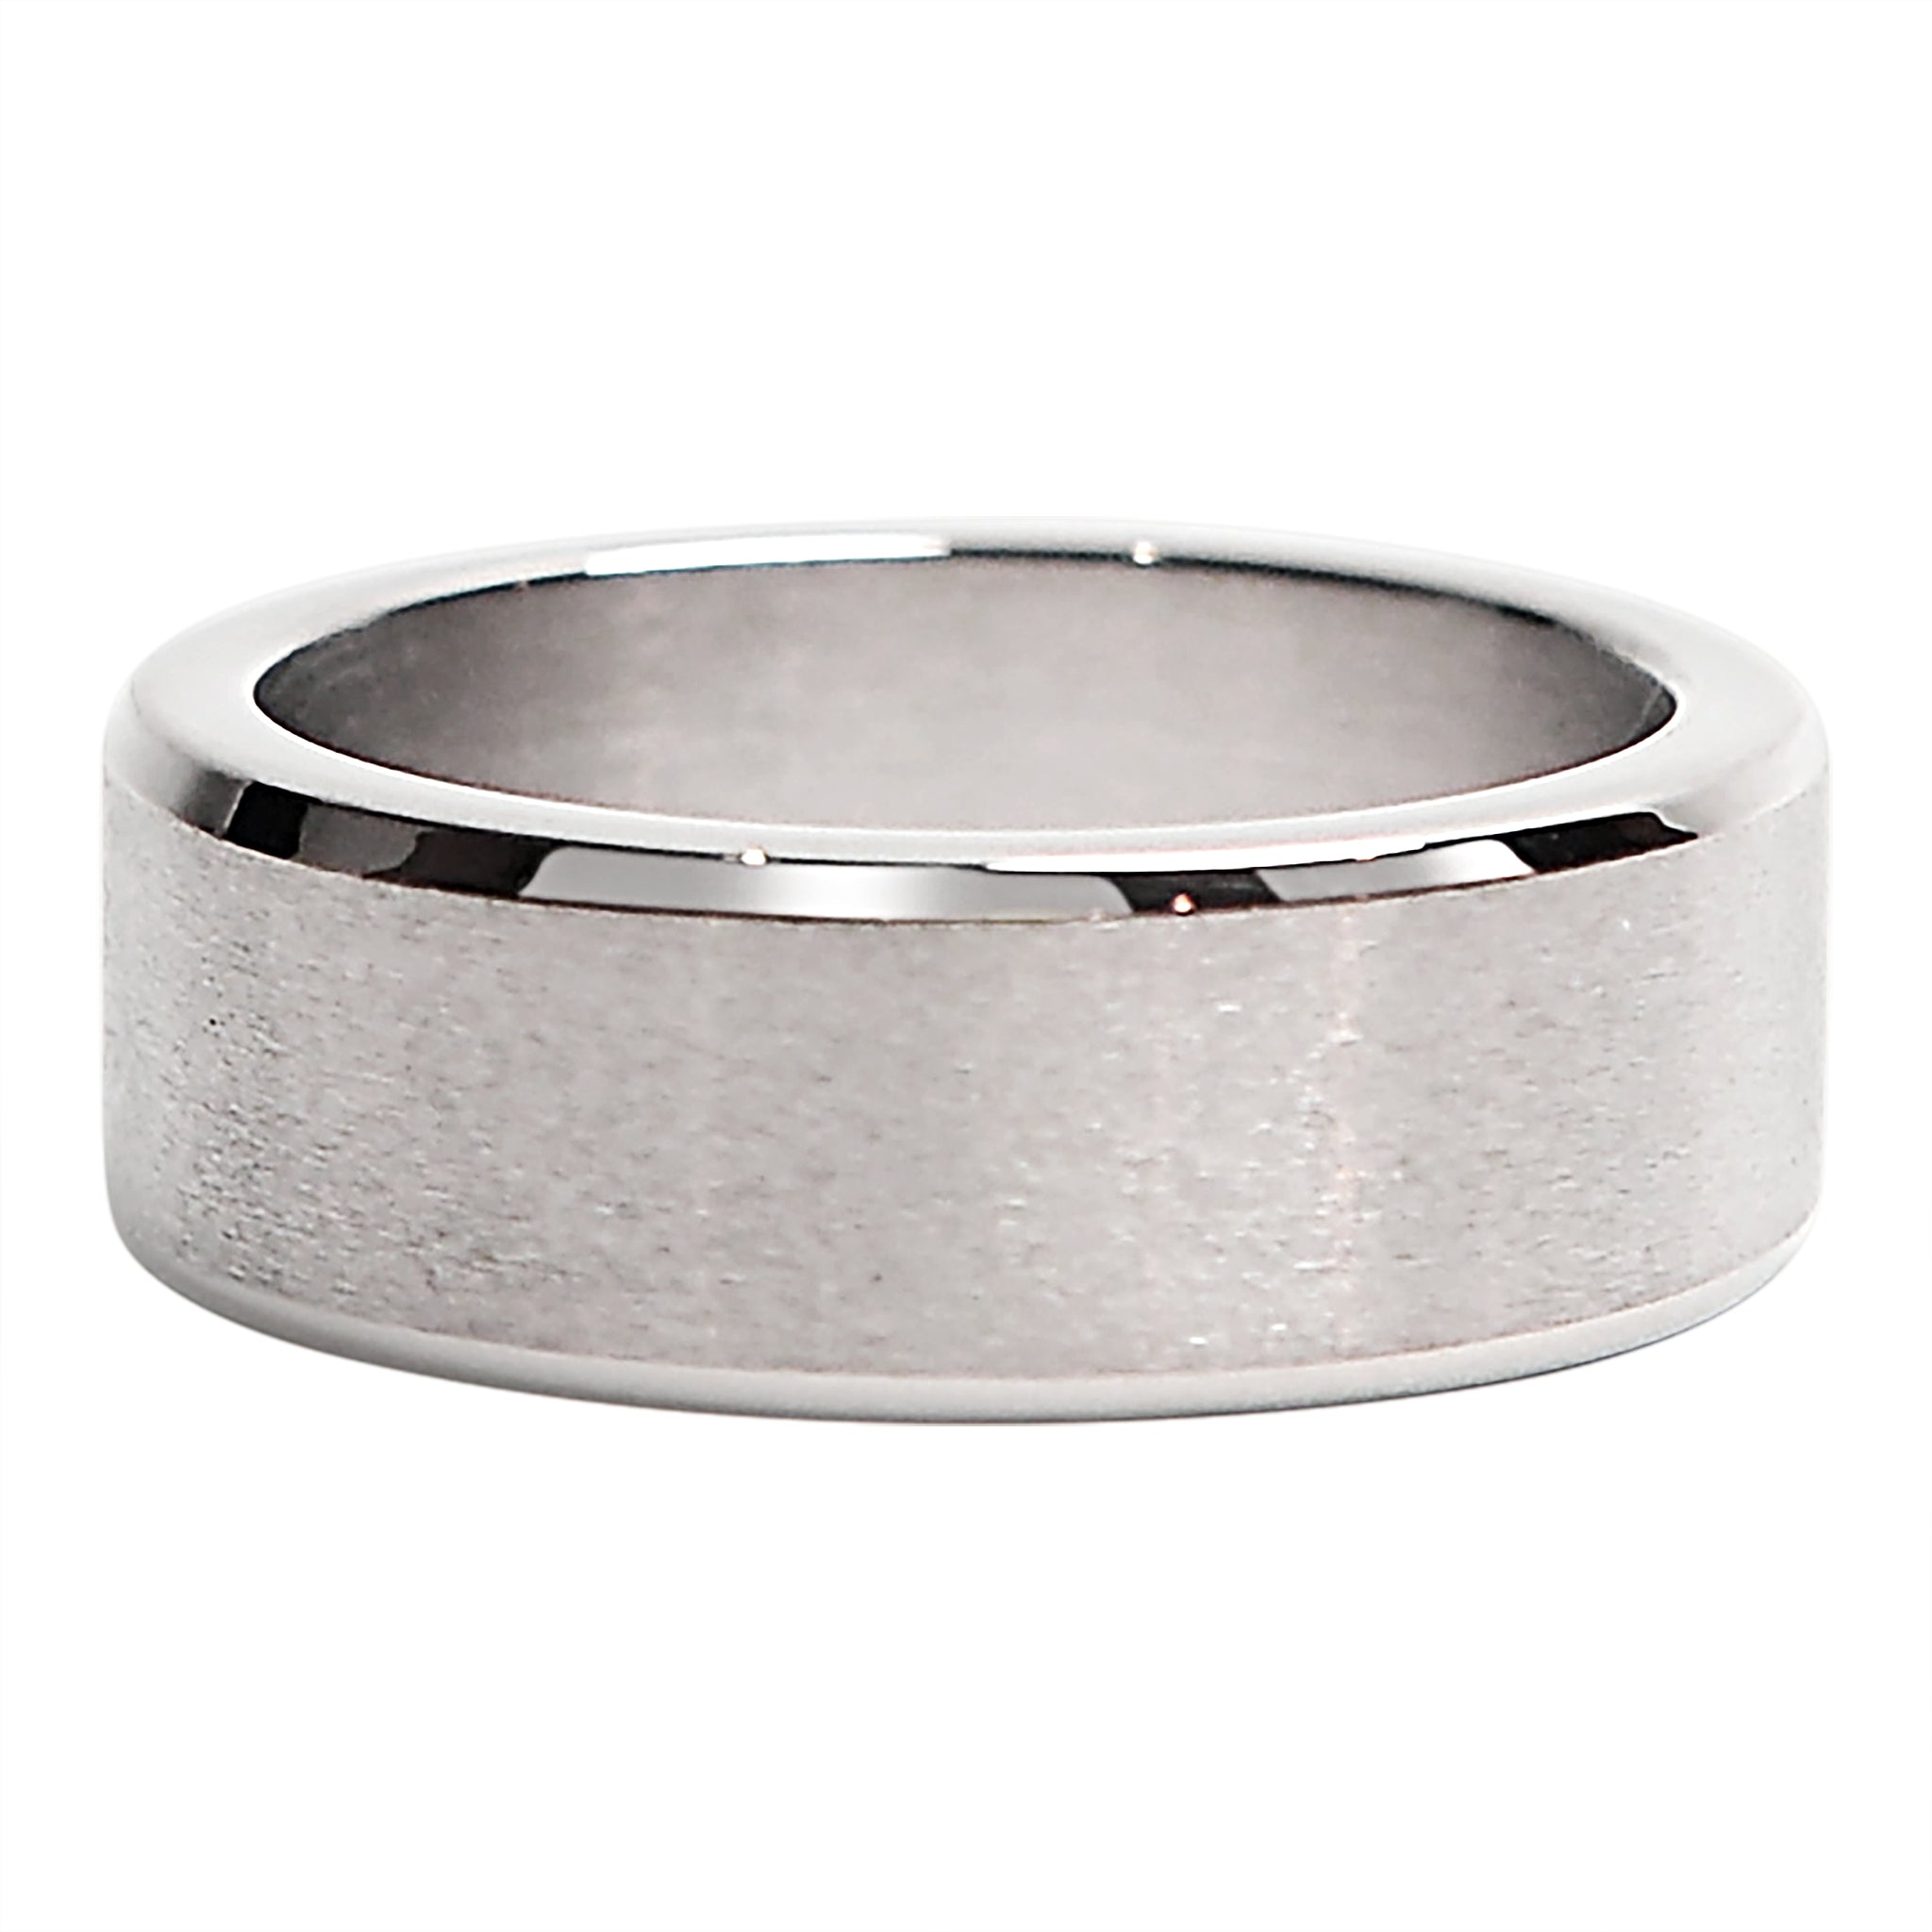 Stainless Steel Brushed Center Ring / NCZ0149-stainless steel jewelry good- stainless steel jewelry cleaner- gold stainless steel jewelry- stainless steel jewelries- stainless steel jewelry mens- stainless steel good for jewelry